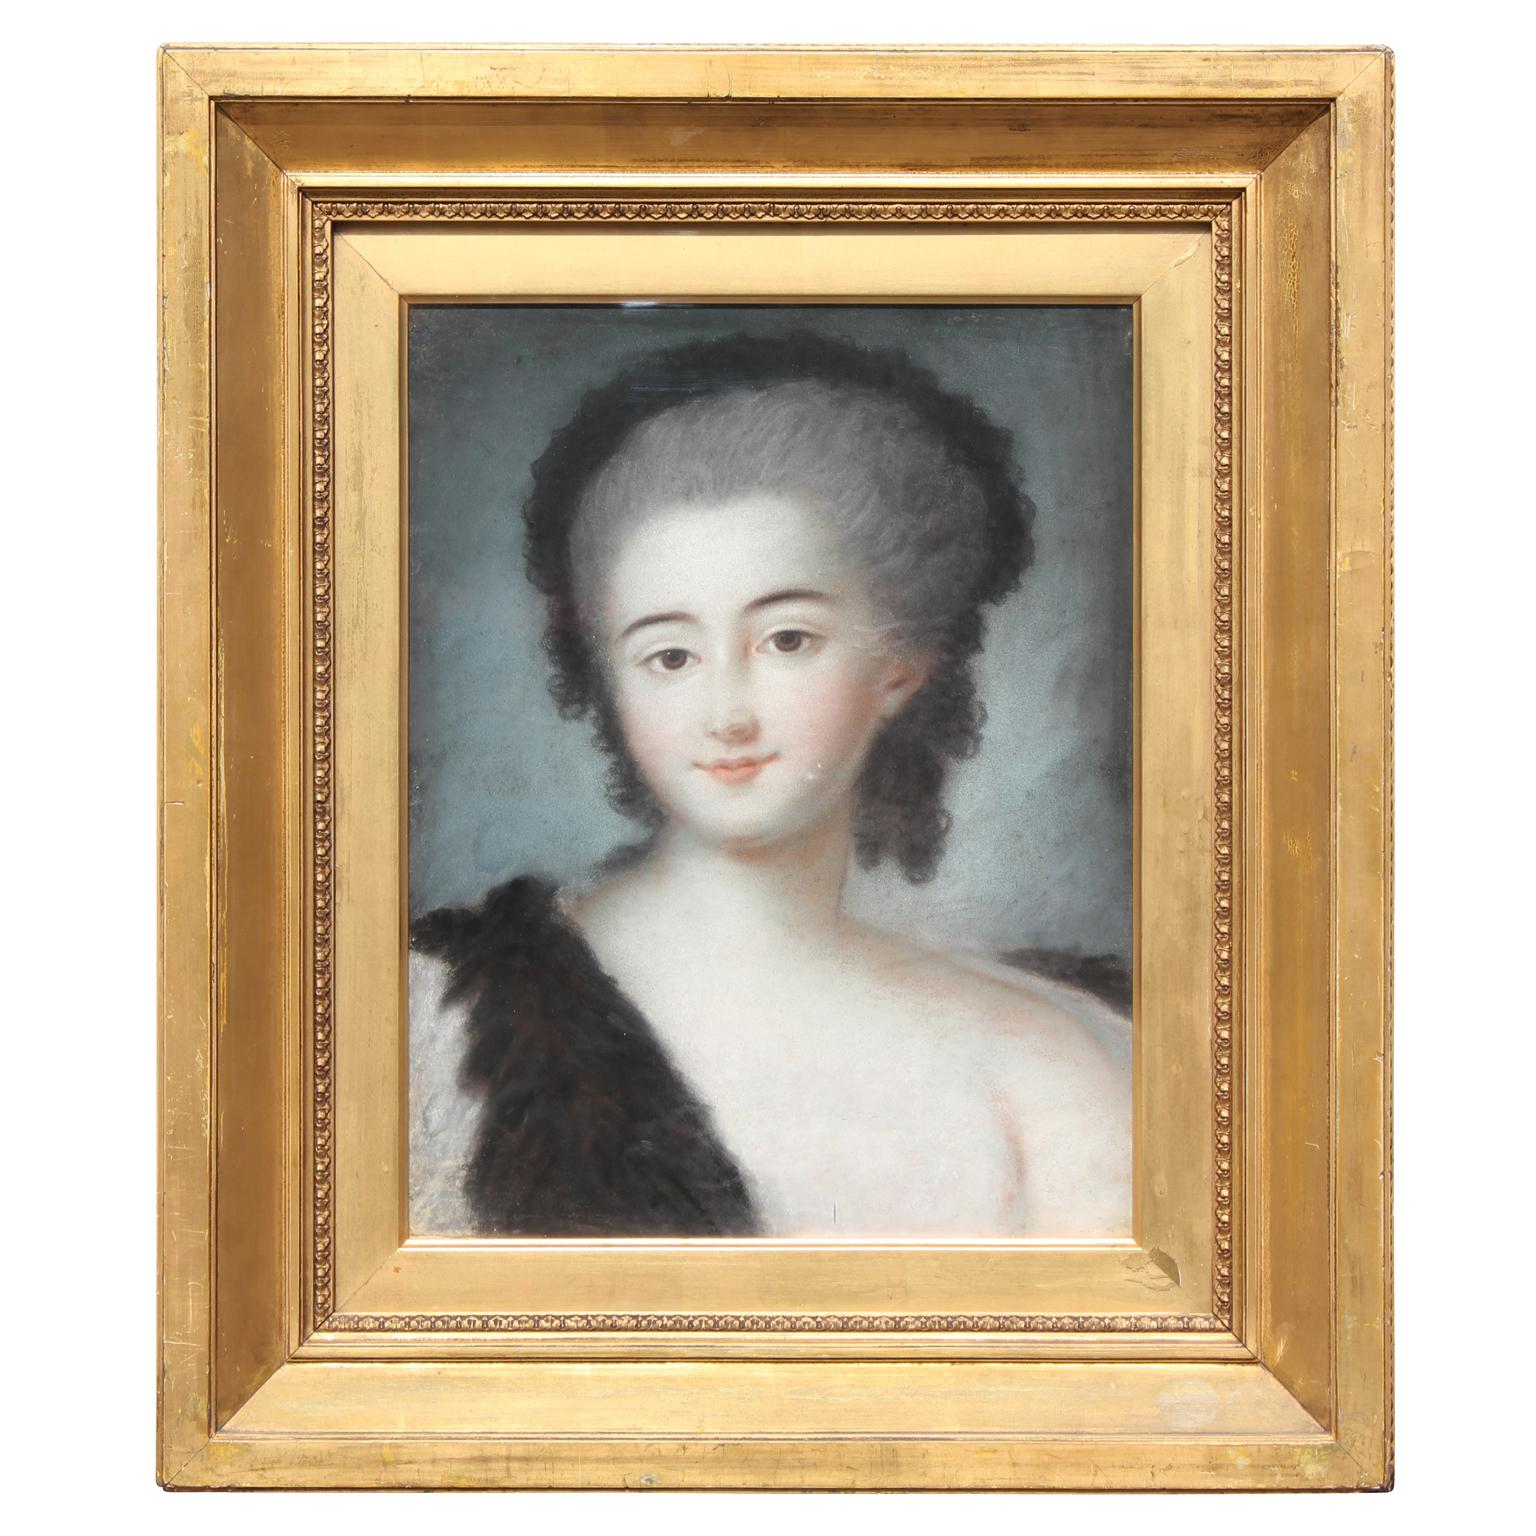 Done in the school of Rosalba Carriera, 18th century portrait of a women with a gilt frame. Untitled and undated, done with oil pastel. 
Dimensions without Frame: H 16.25 in x W 13 in x D .25 in.

Artist Biography: Rosalba Carriera was born in